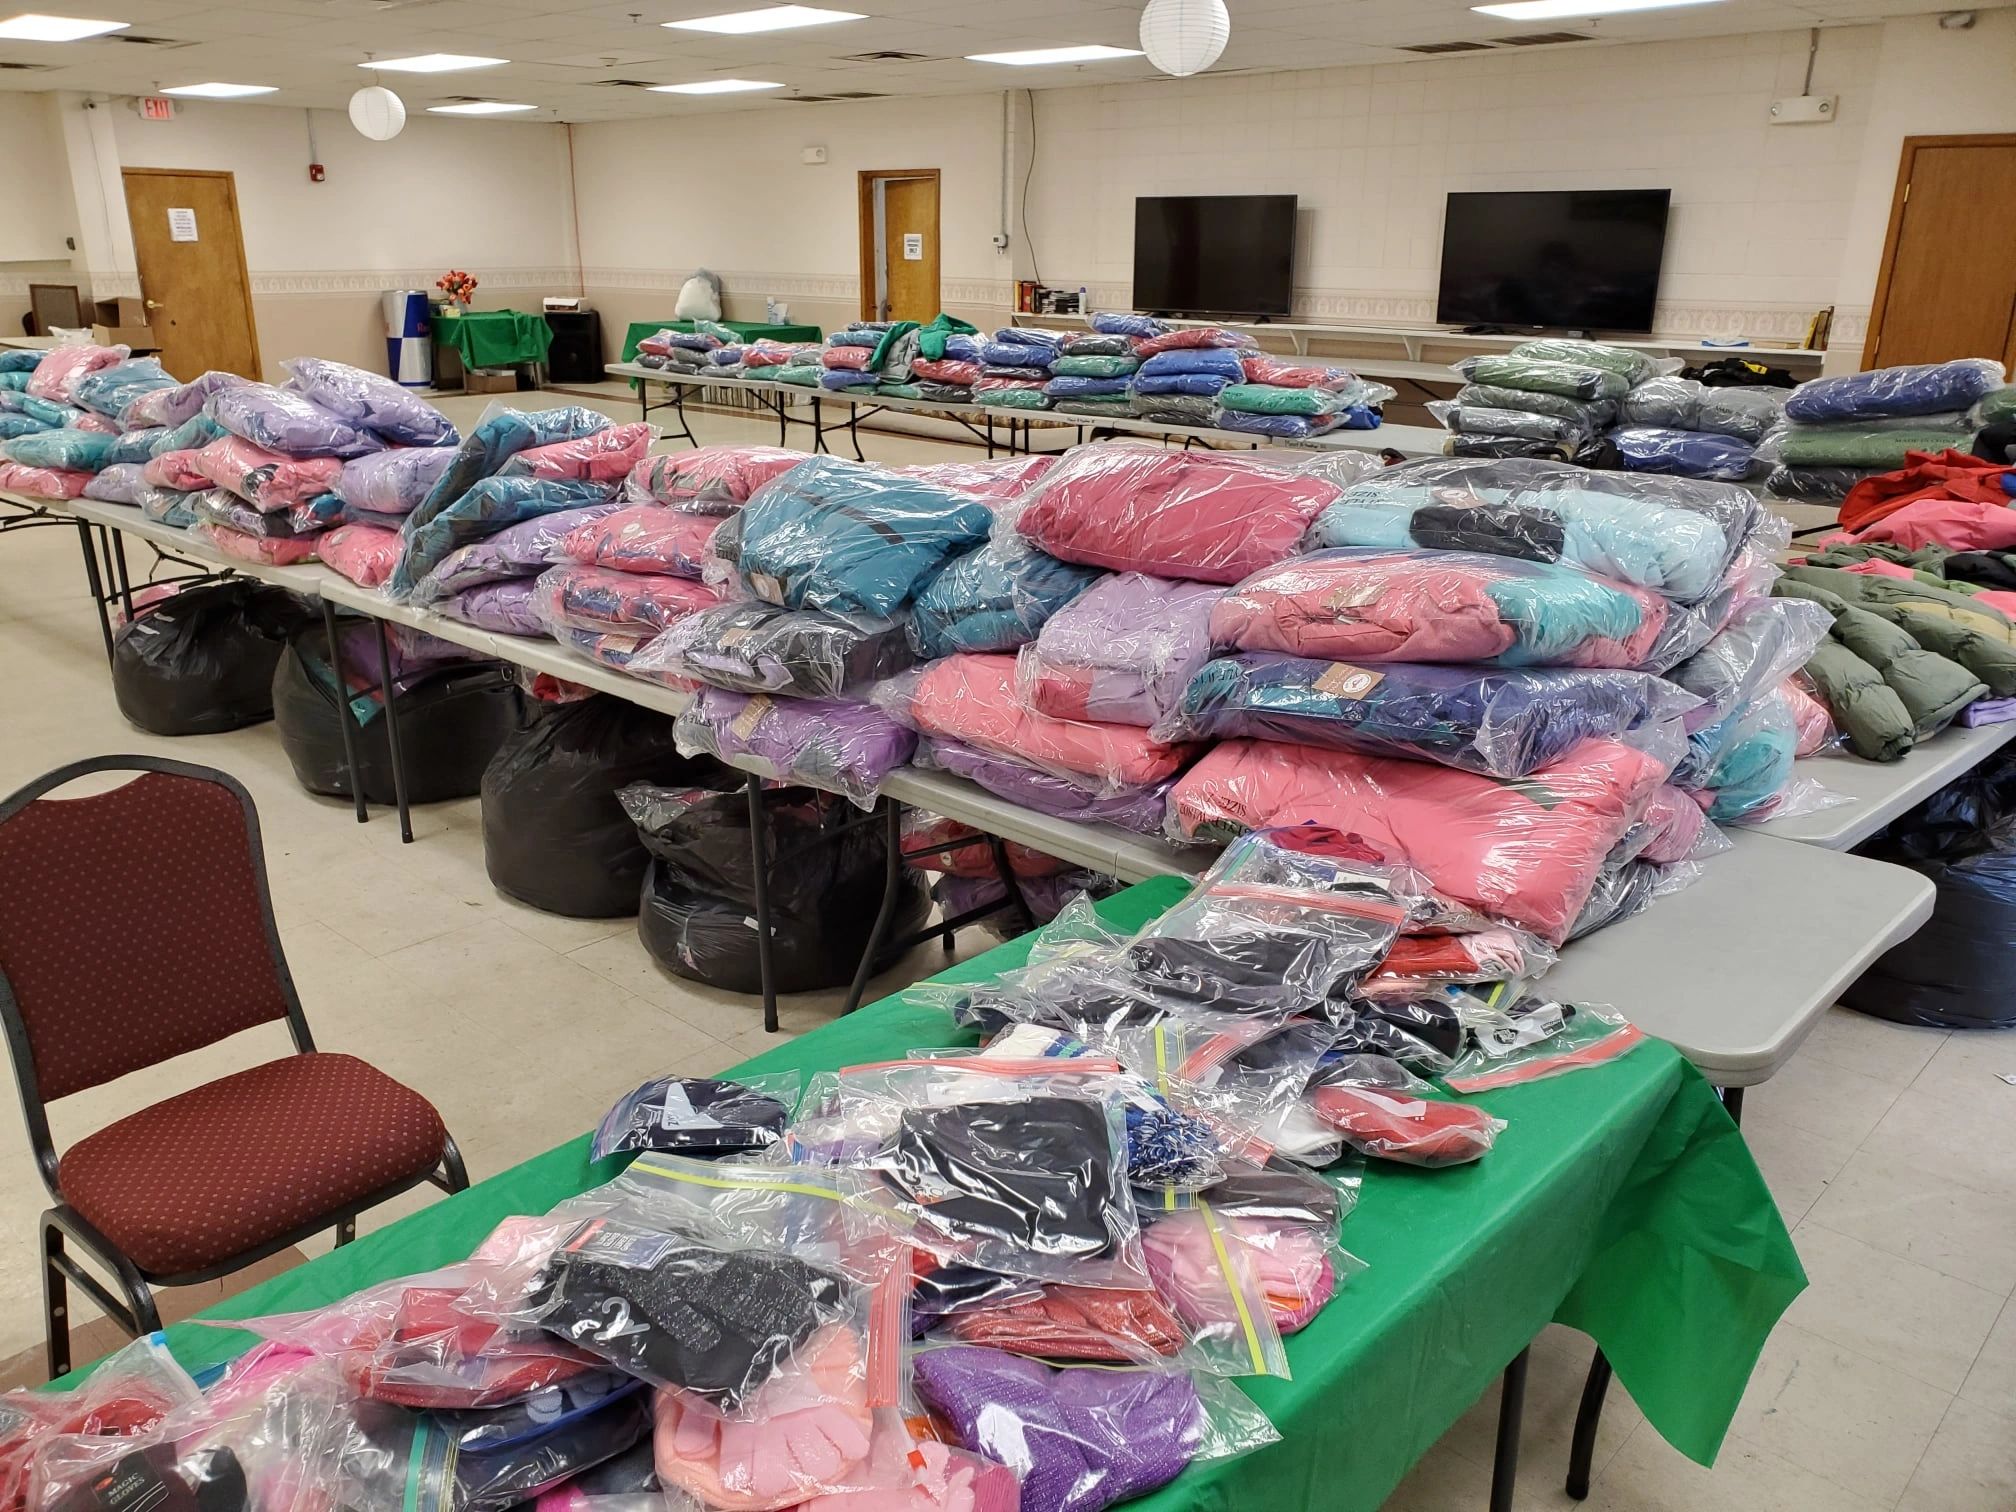 We had over 2000 brand new coats to giveaway!!!